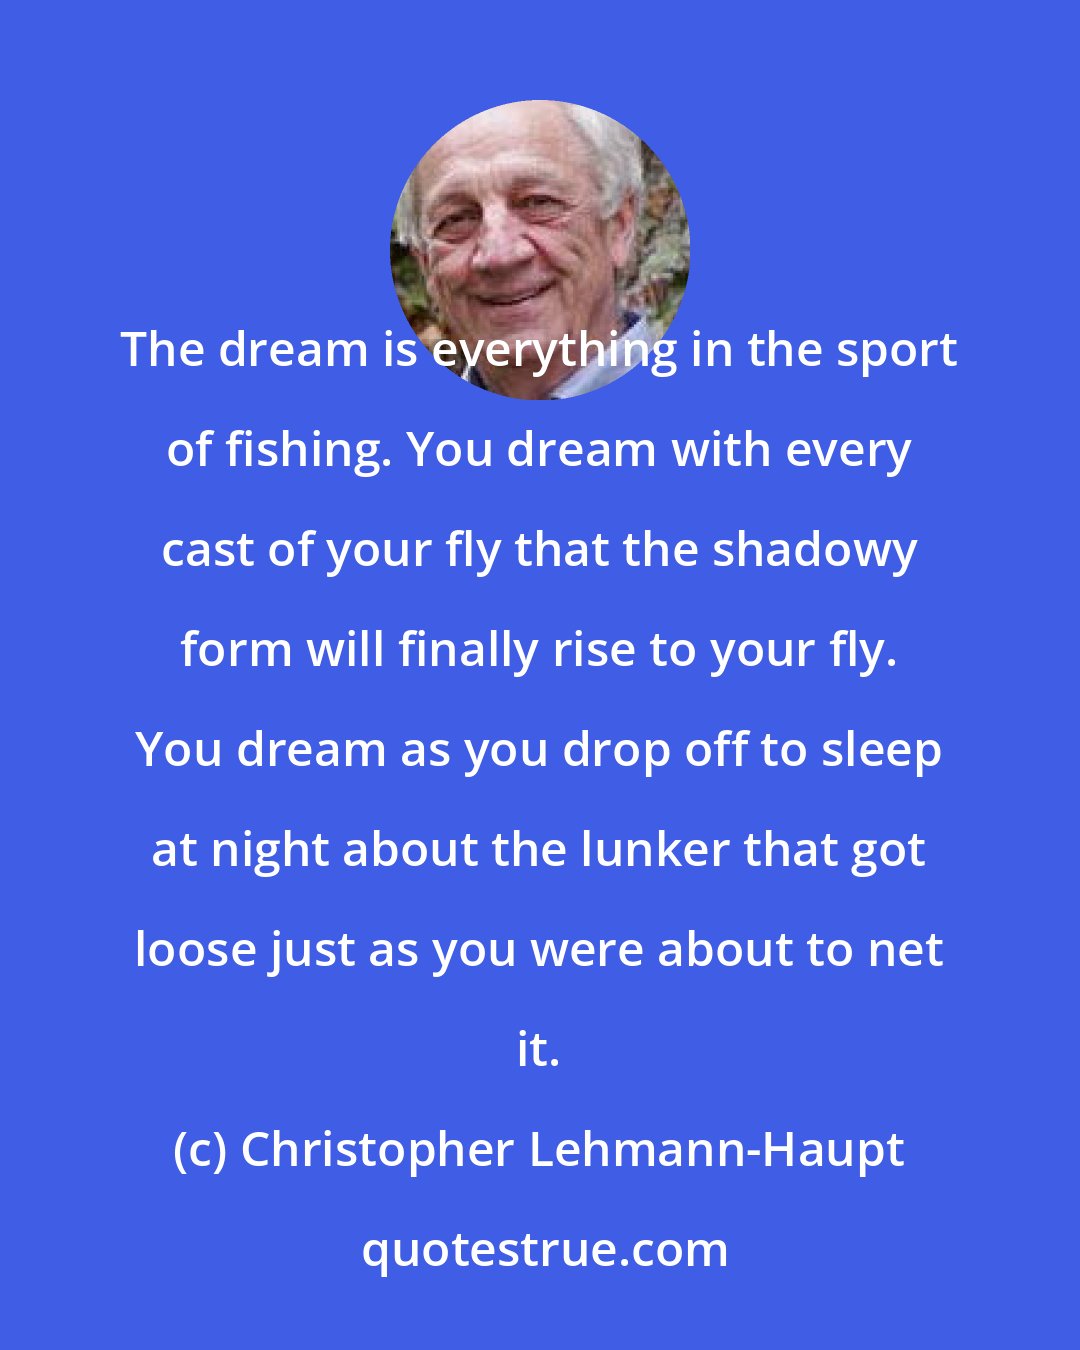 Christopher Lehmann-Haupt: The dream is everything in the sport of fishing. You dream with every cast of your fly that the shadowy form will finally rise to your fly. You dream as you drop off to sleep at night about the lunker that got loose just as you were about to net it.